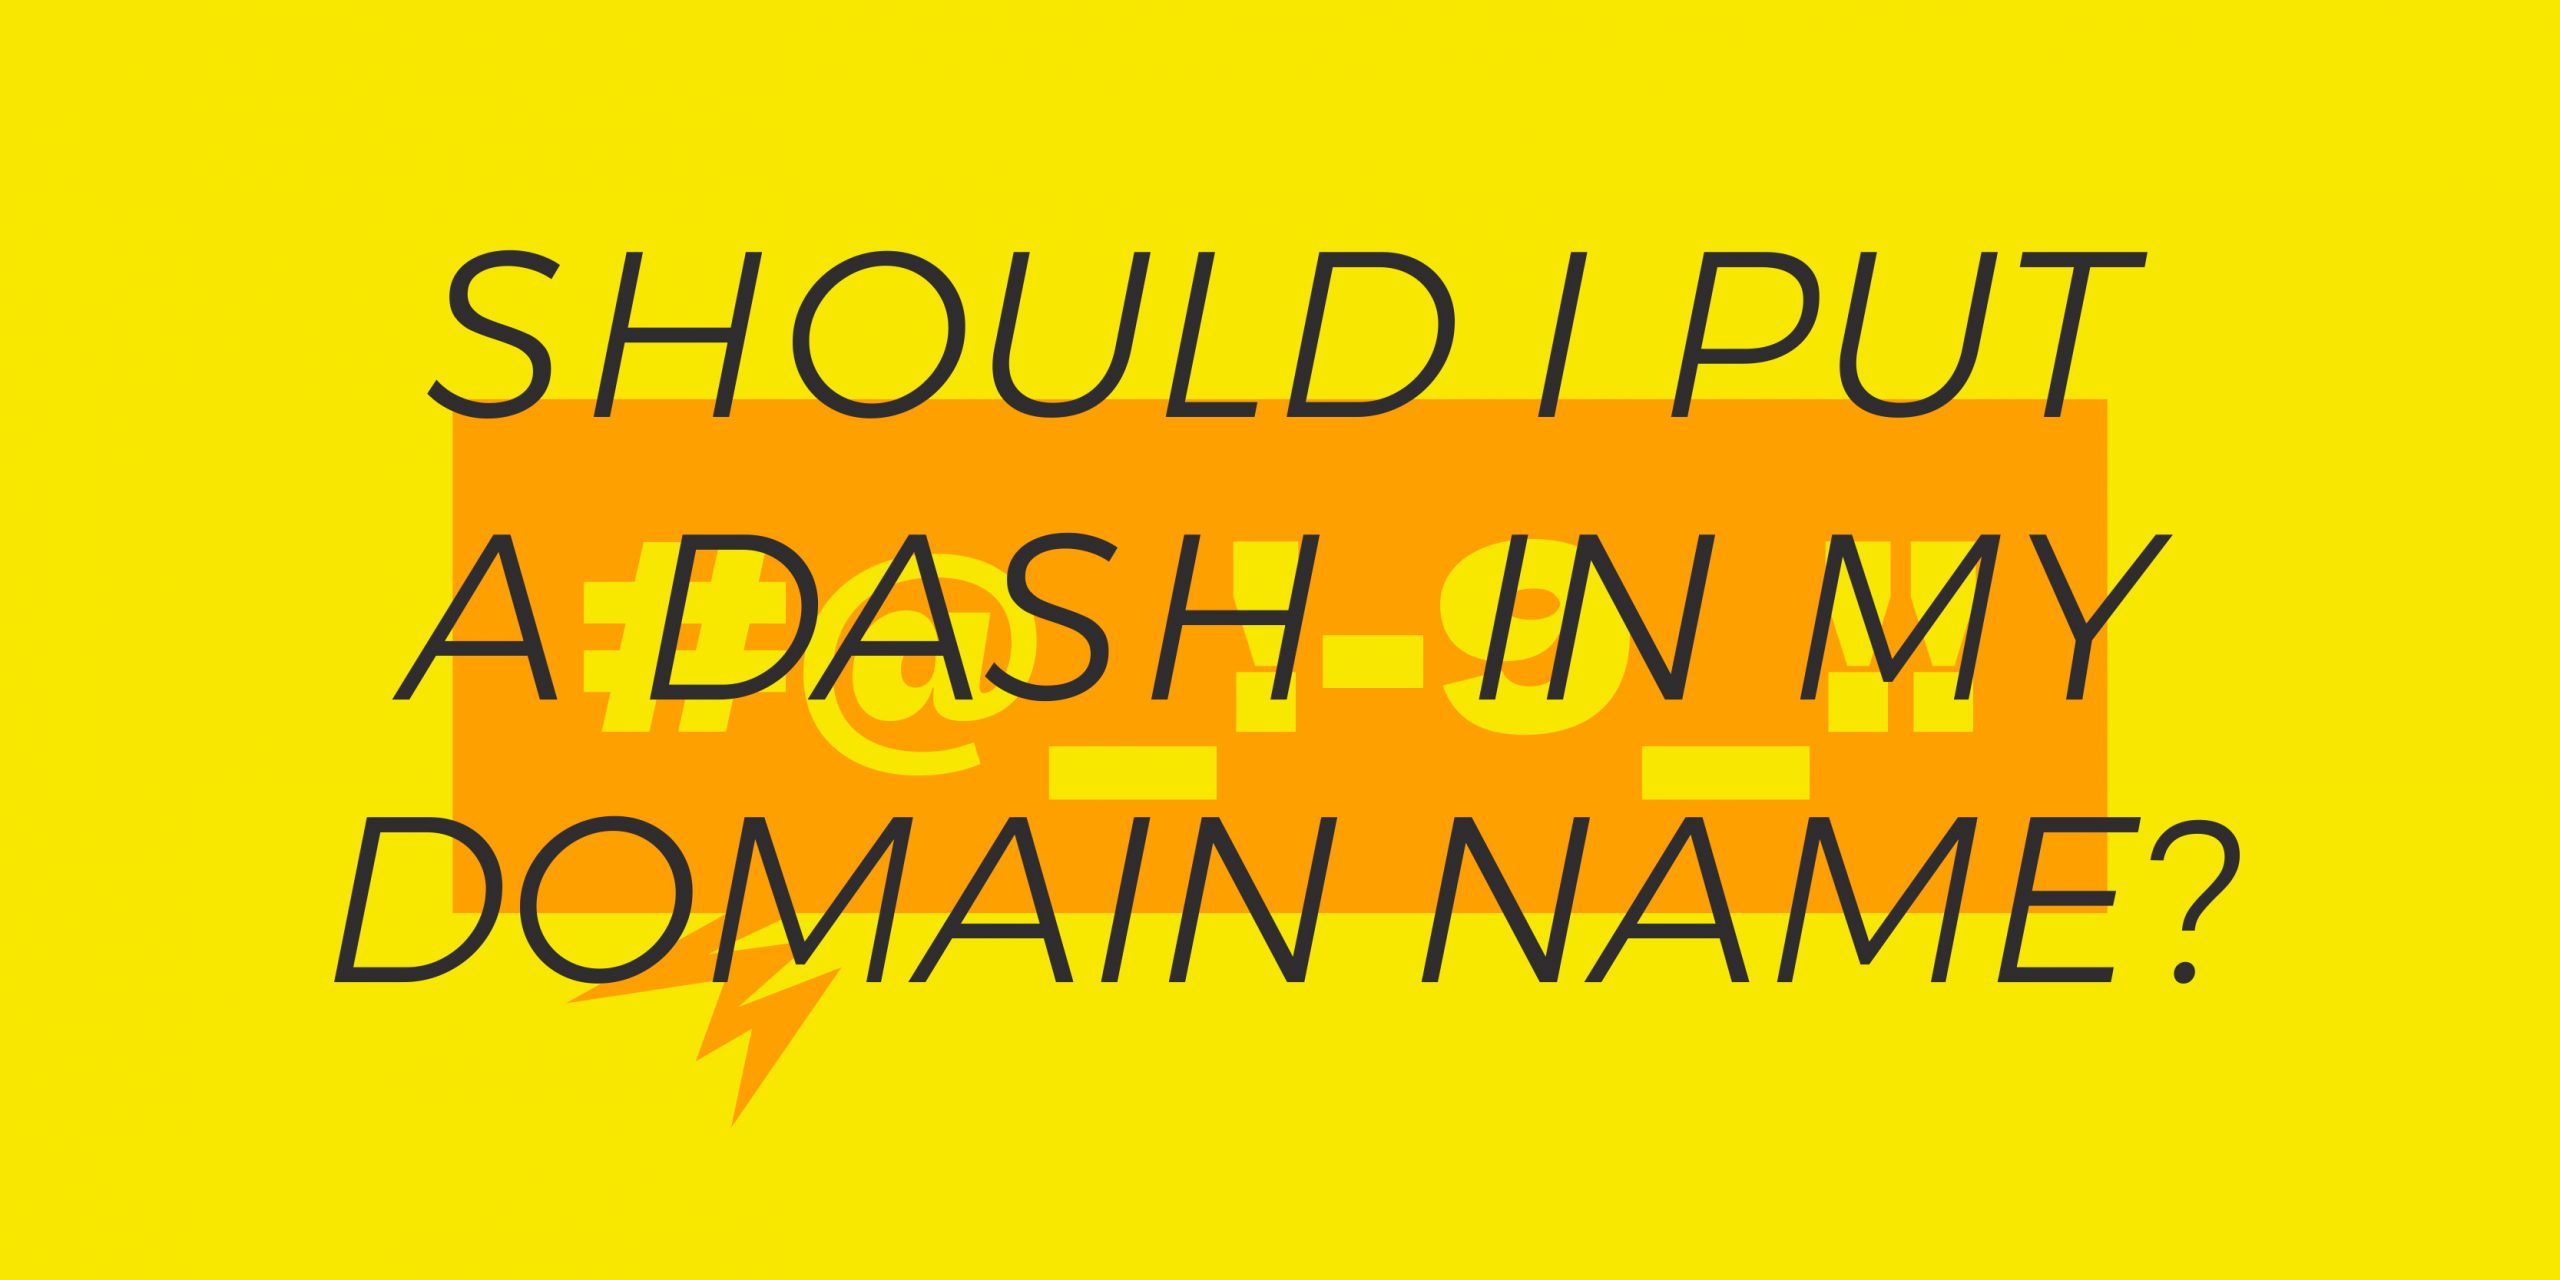 Should I put a dash in my domain name?